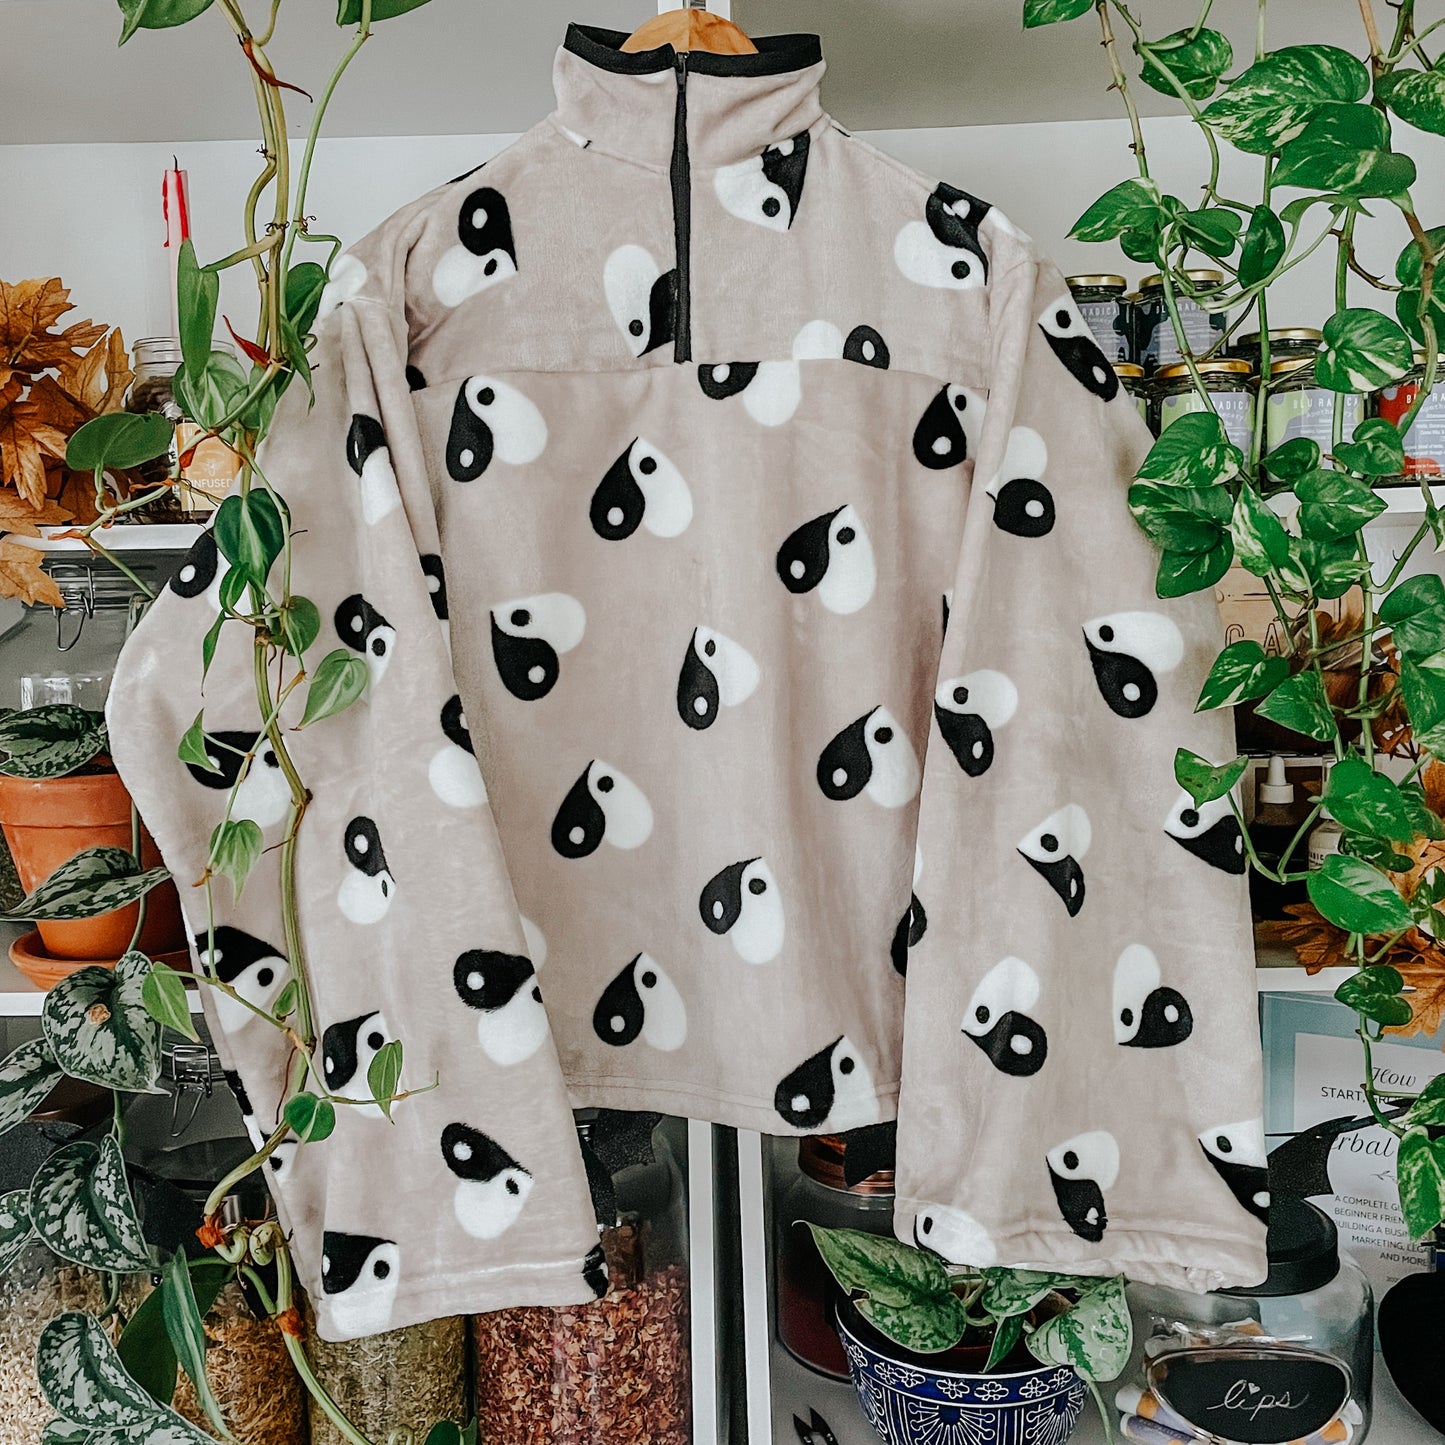 Blanket Jacket: Retro High Collar with Zipper - Ying Yang Pullover